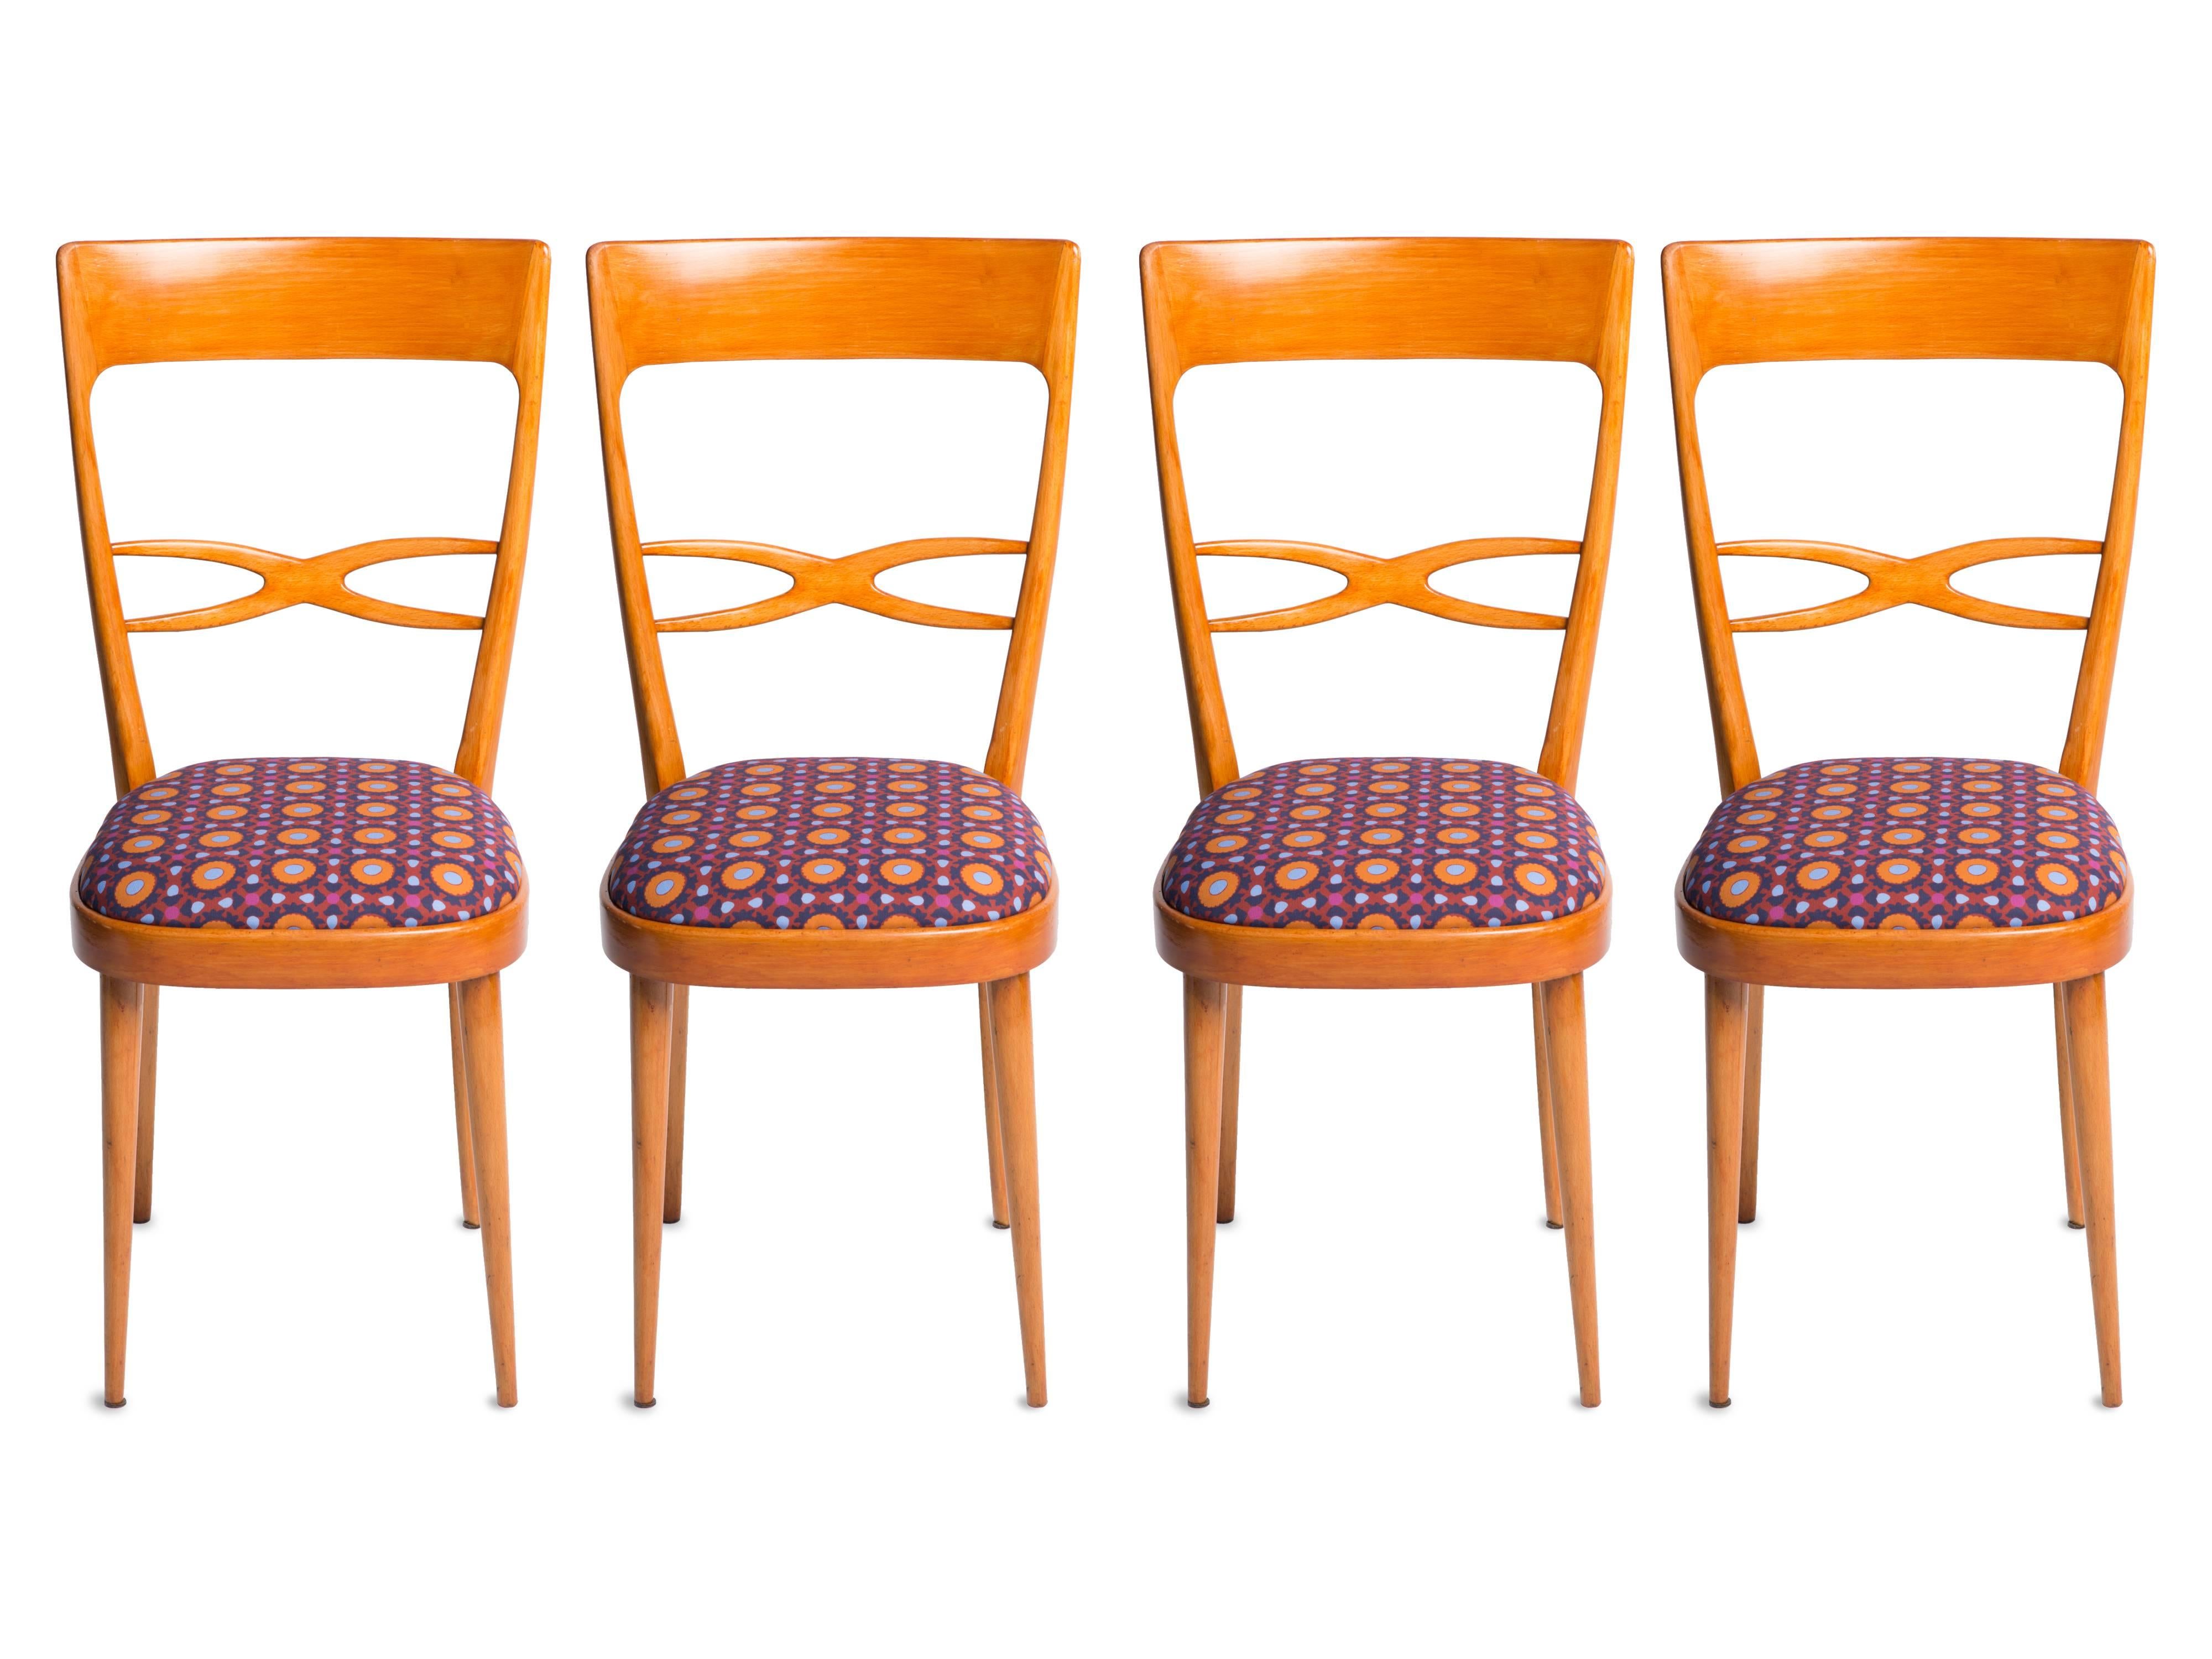 Set of six 1950s Italian chairs in the style of Melchiorre Bega, featuring varnished birch wood and newly upholstered seats. All six chairs were sourced in Milan by LaDoubleJ: two chairs feature the brand’s re-issued vintage Tulipani fabric, while